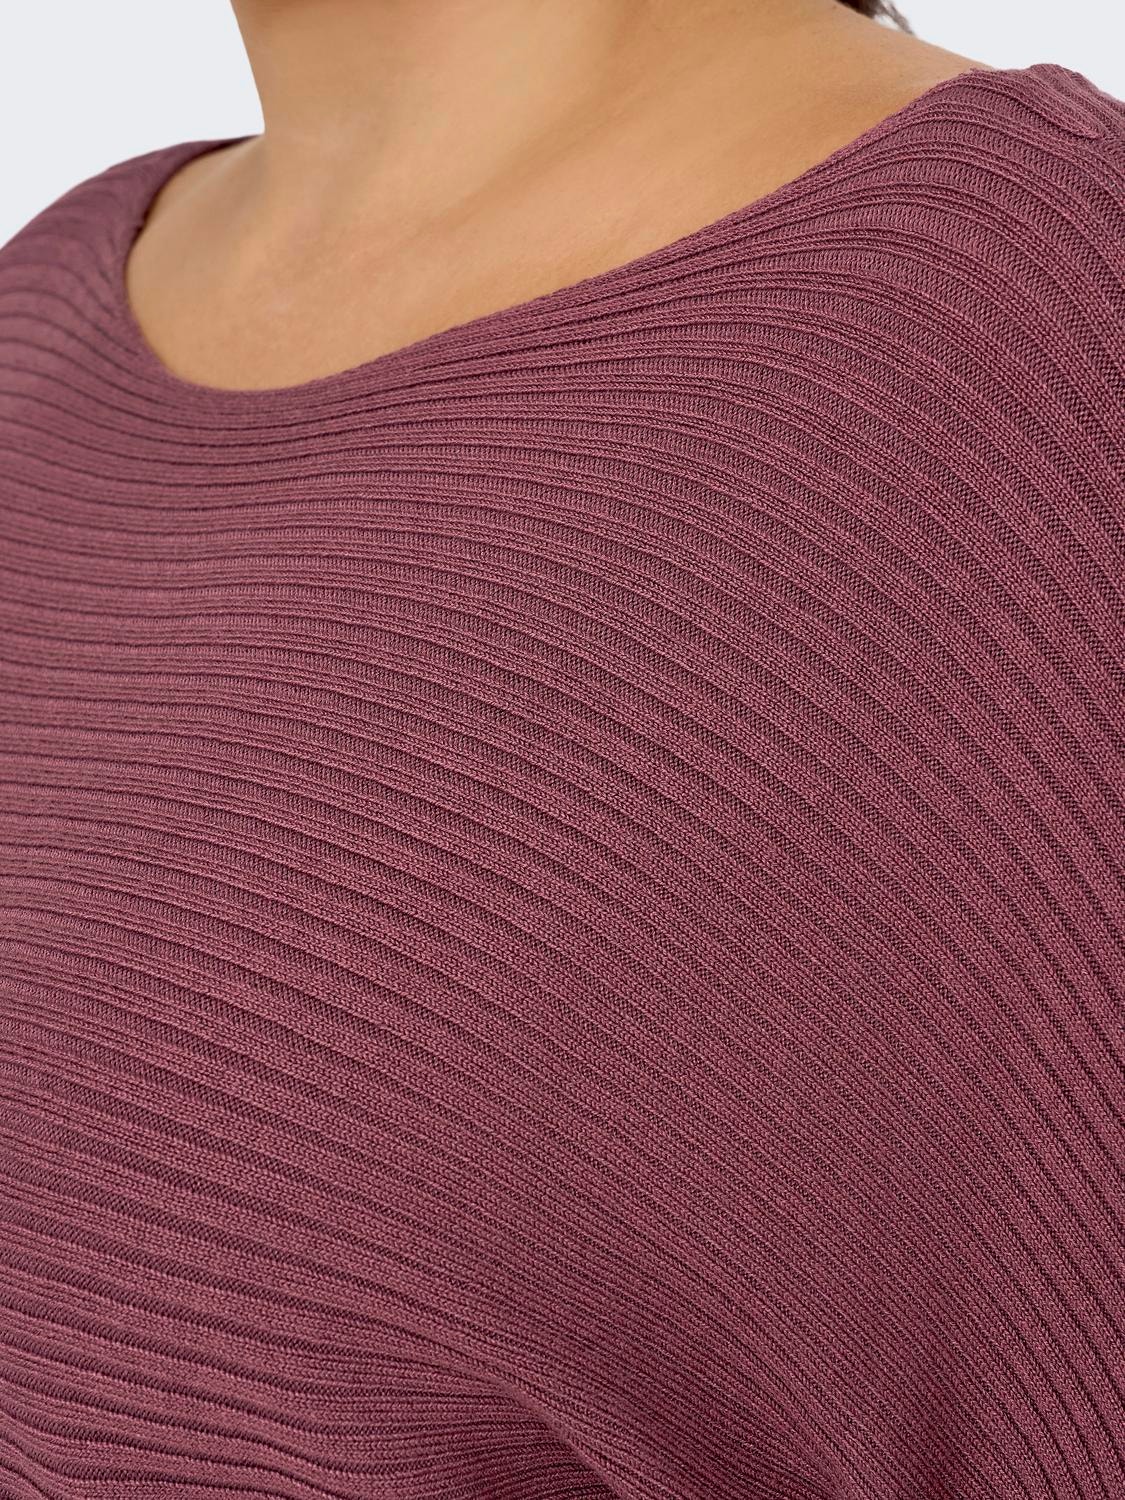 ONLY Knit Fit Boat neck Ribbed cuffs Pullover -Rose Brown - 15306803